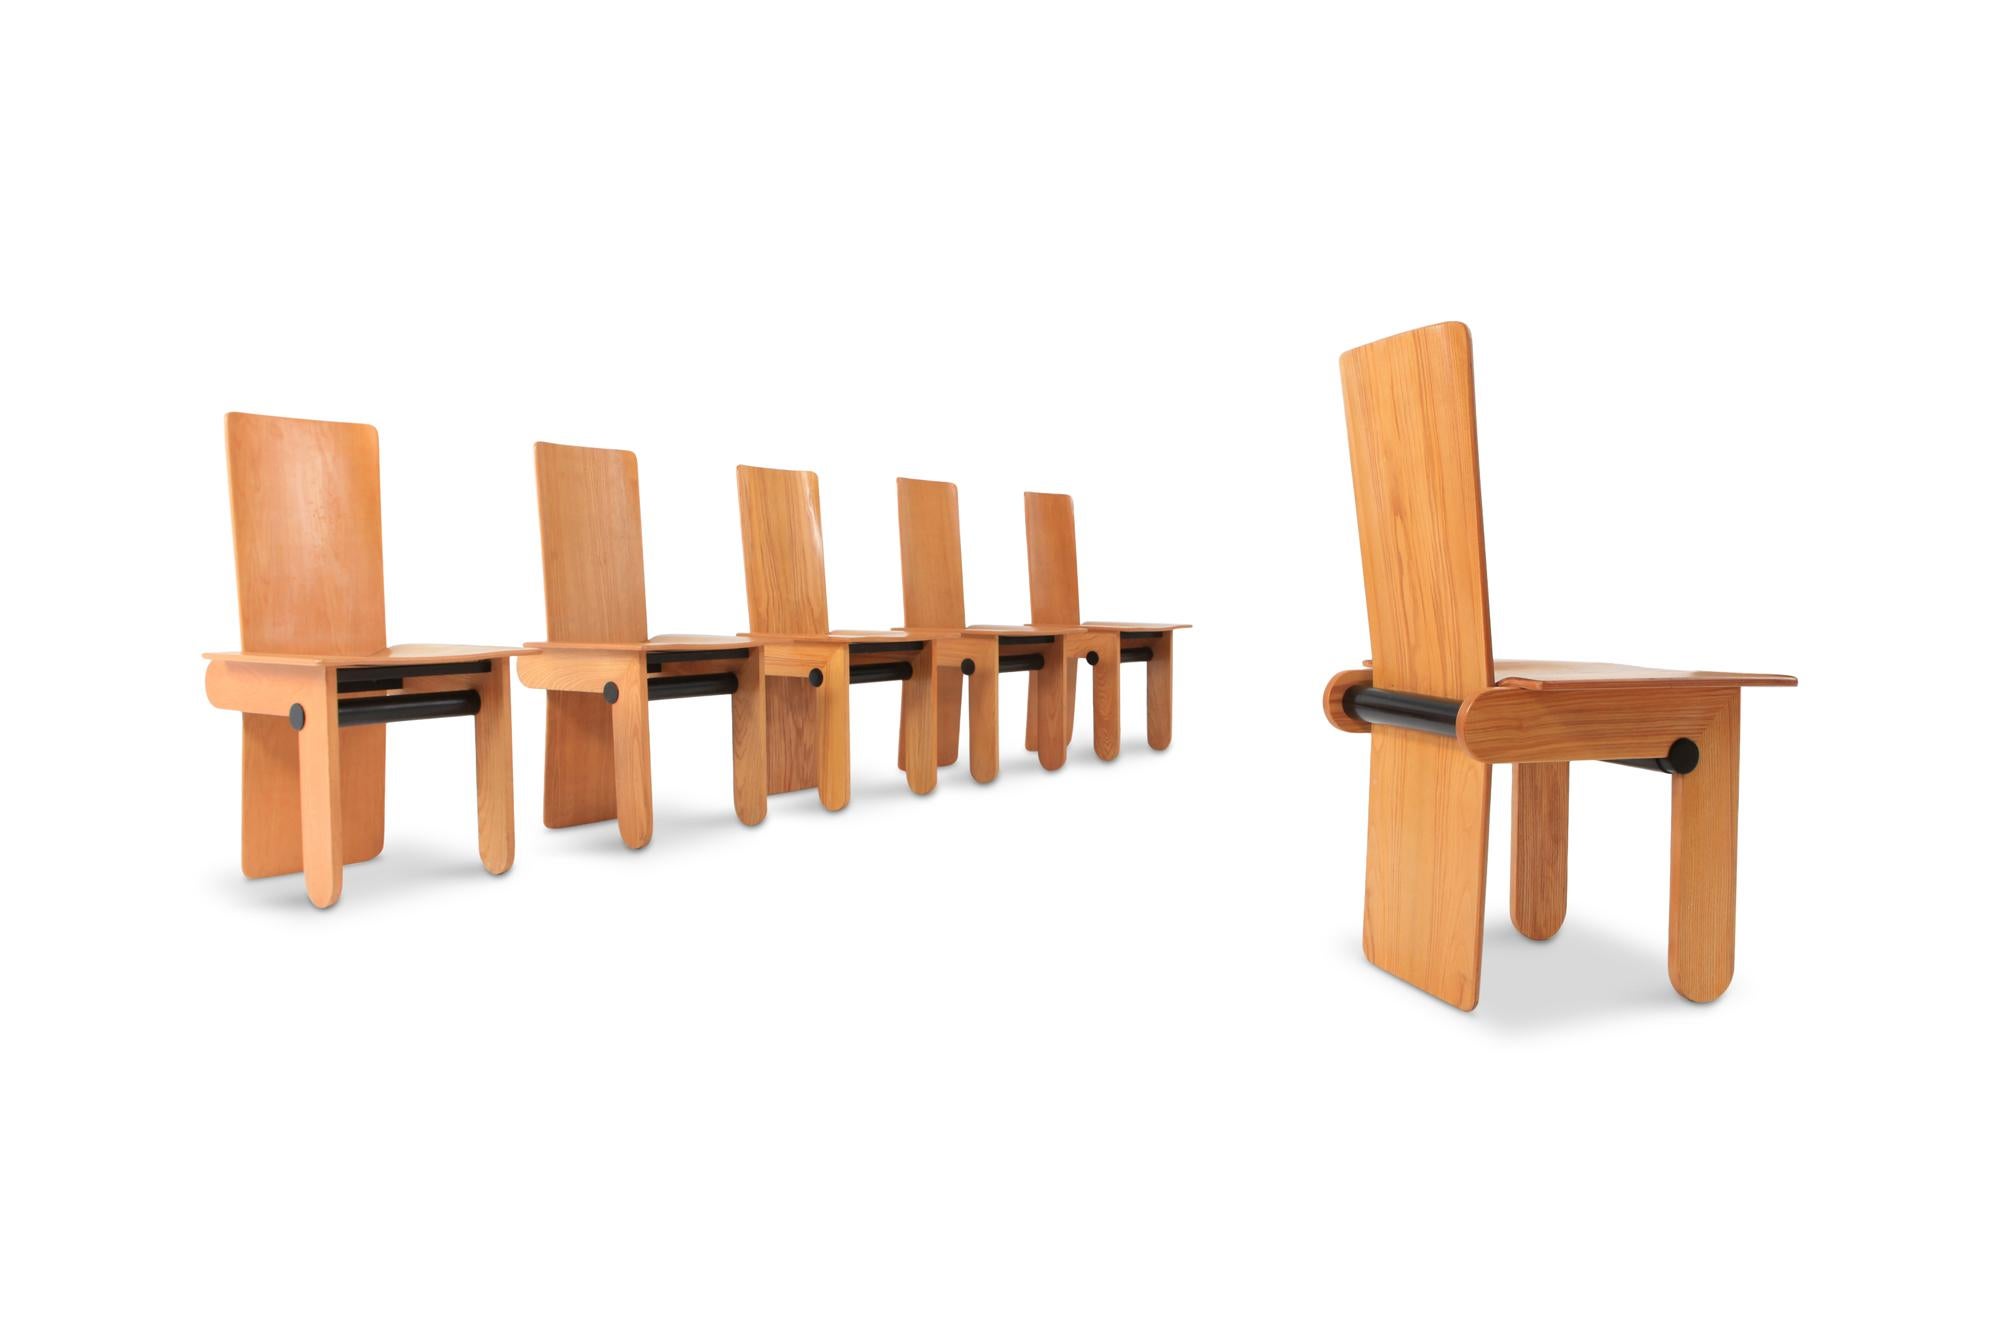 Gavina produced this rare set of six dining chairs designed by Carlo Scarpa in 1974. 

The style is a bit Postmodern but still feels very contemporary. A combination of Italian pinus and ebonized wood. Very sculptural and architectural.